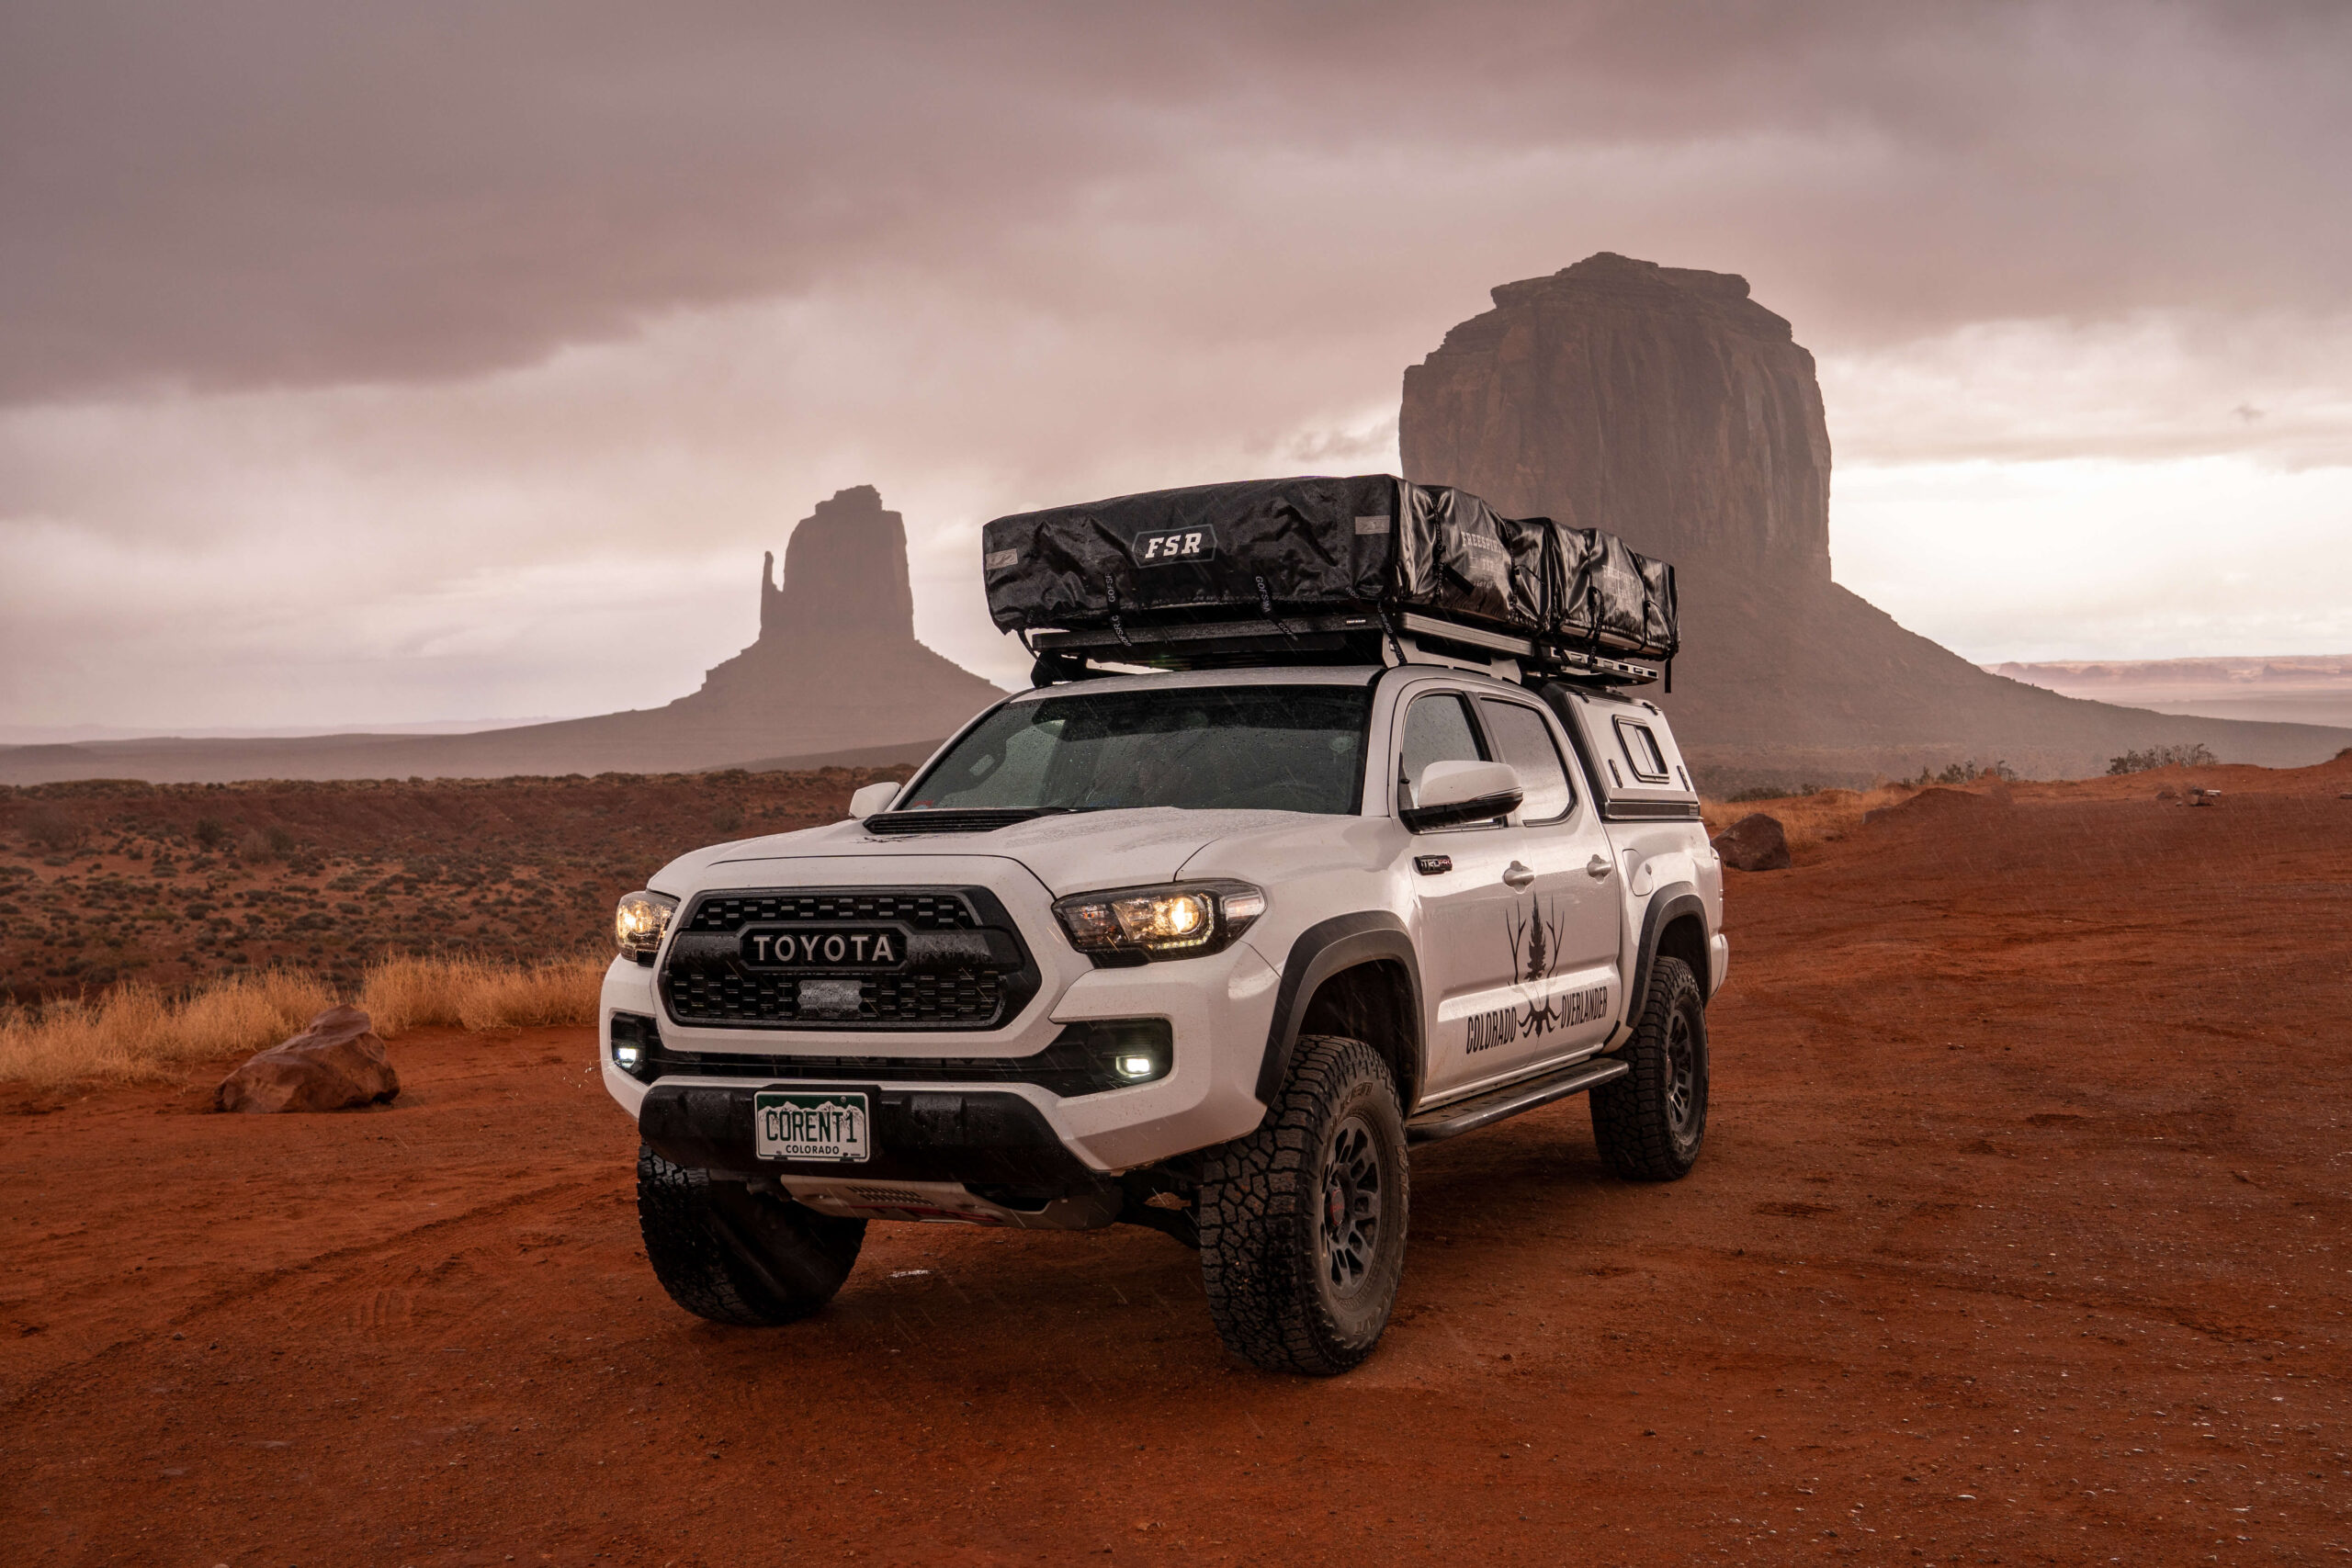 Image of the Colorado Overlander Tacoma in the desert surrounded by beautiful views